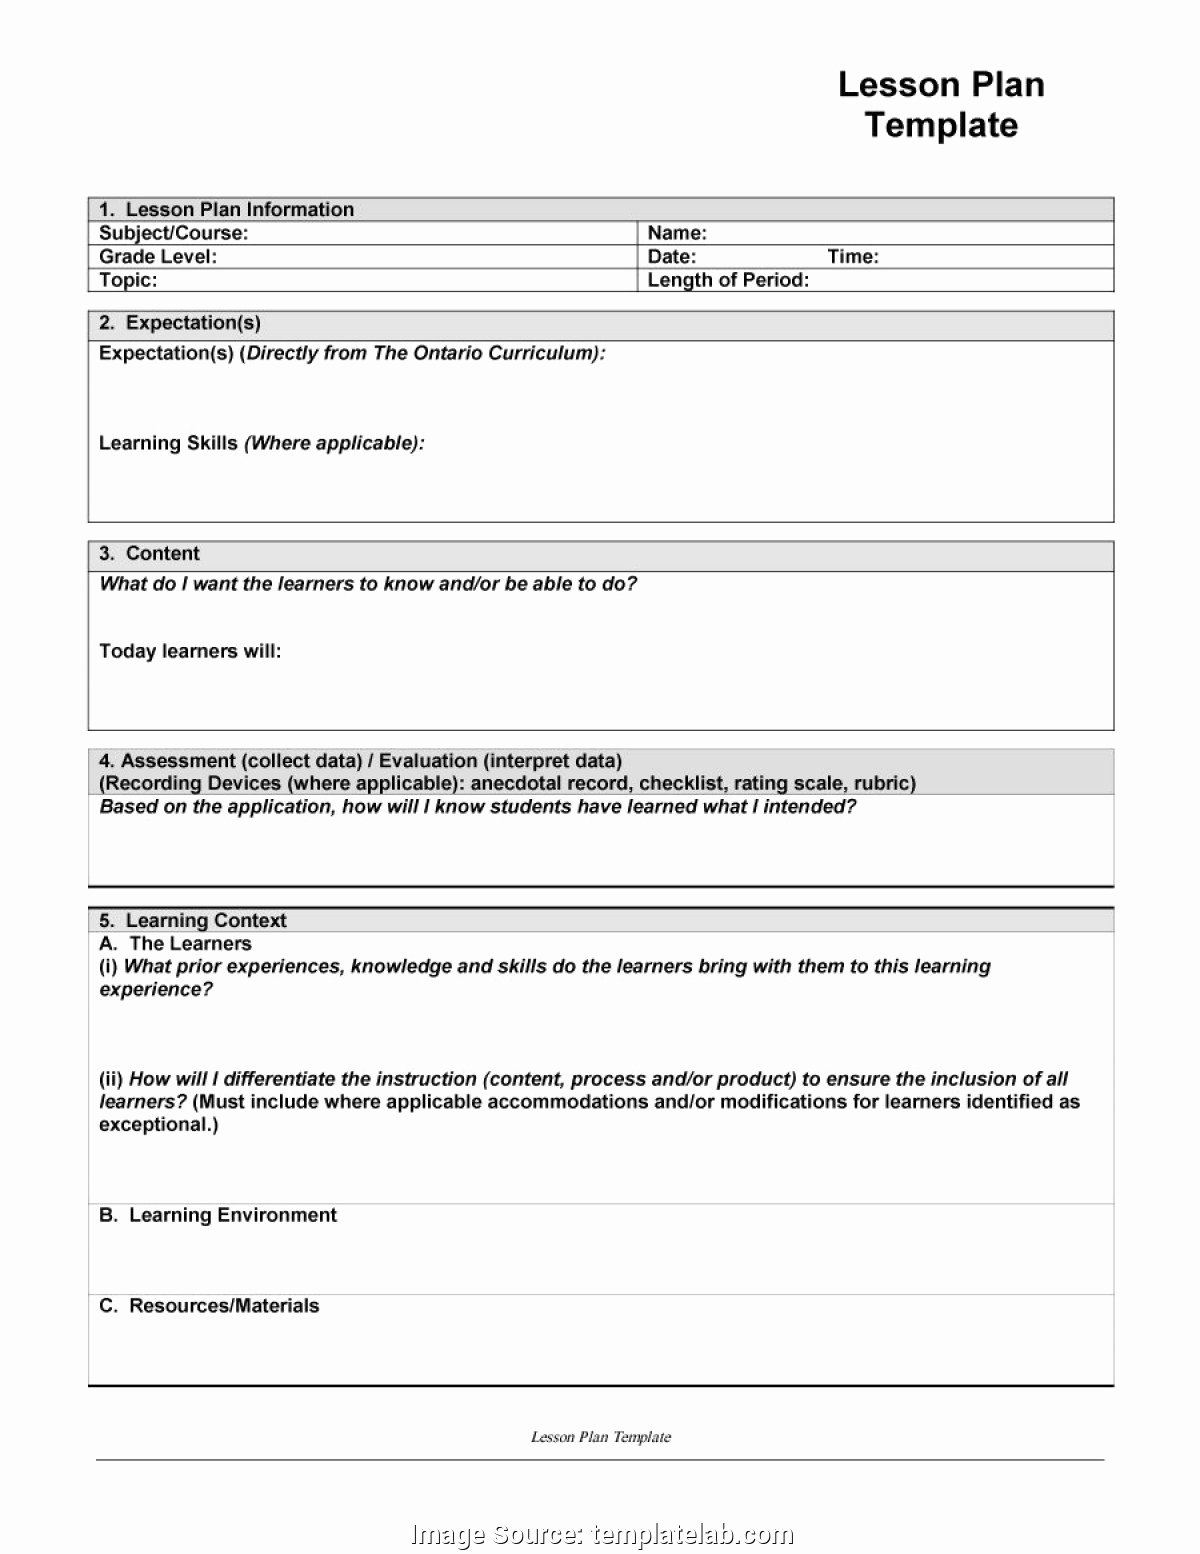 Ccss Lesson Plan Template New Interesting Lesson Plan Template Tario 44 Free Lesson